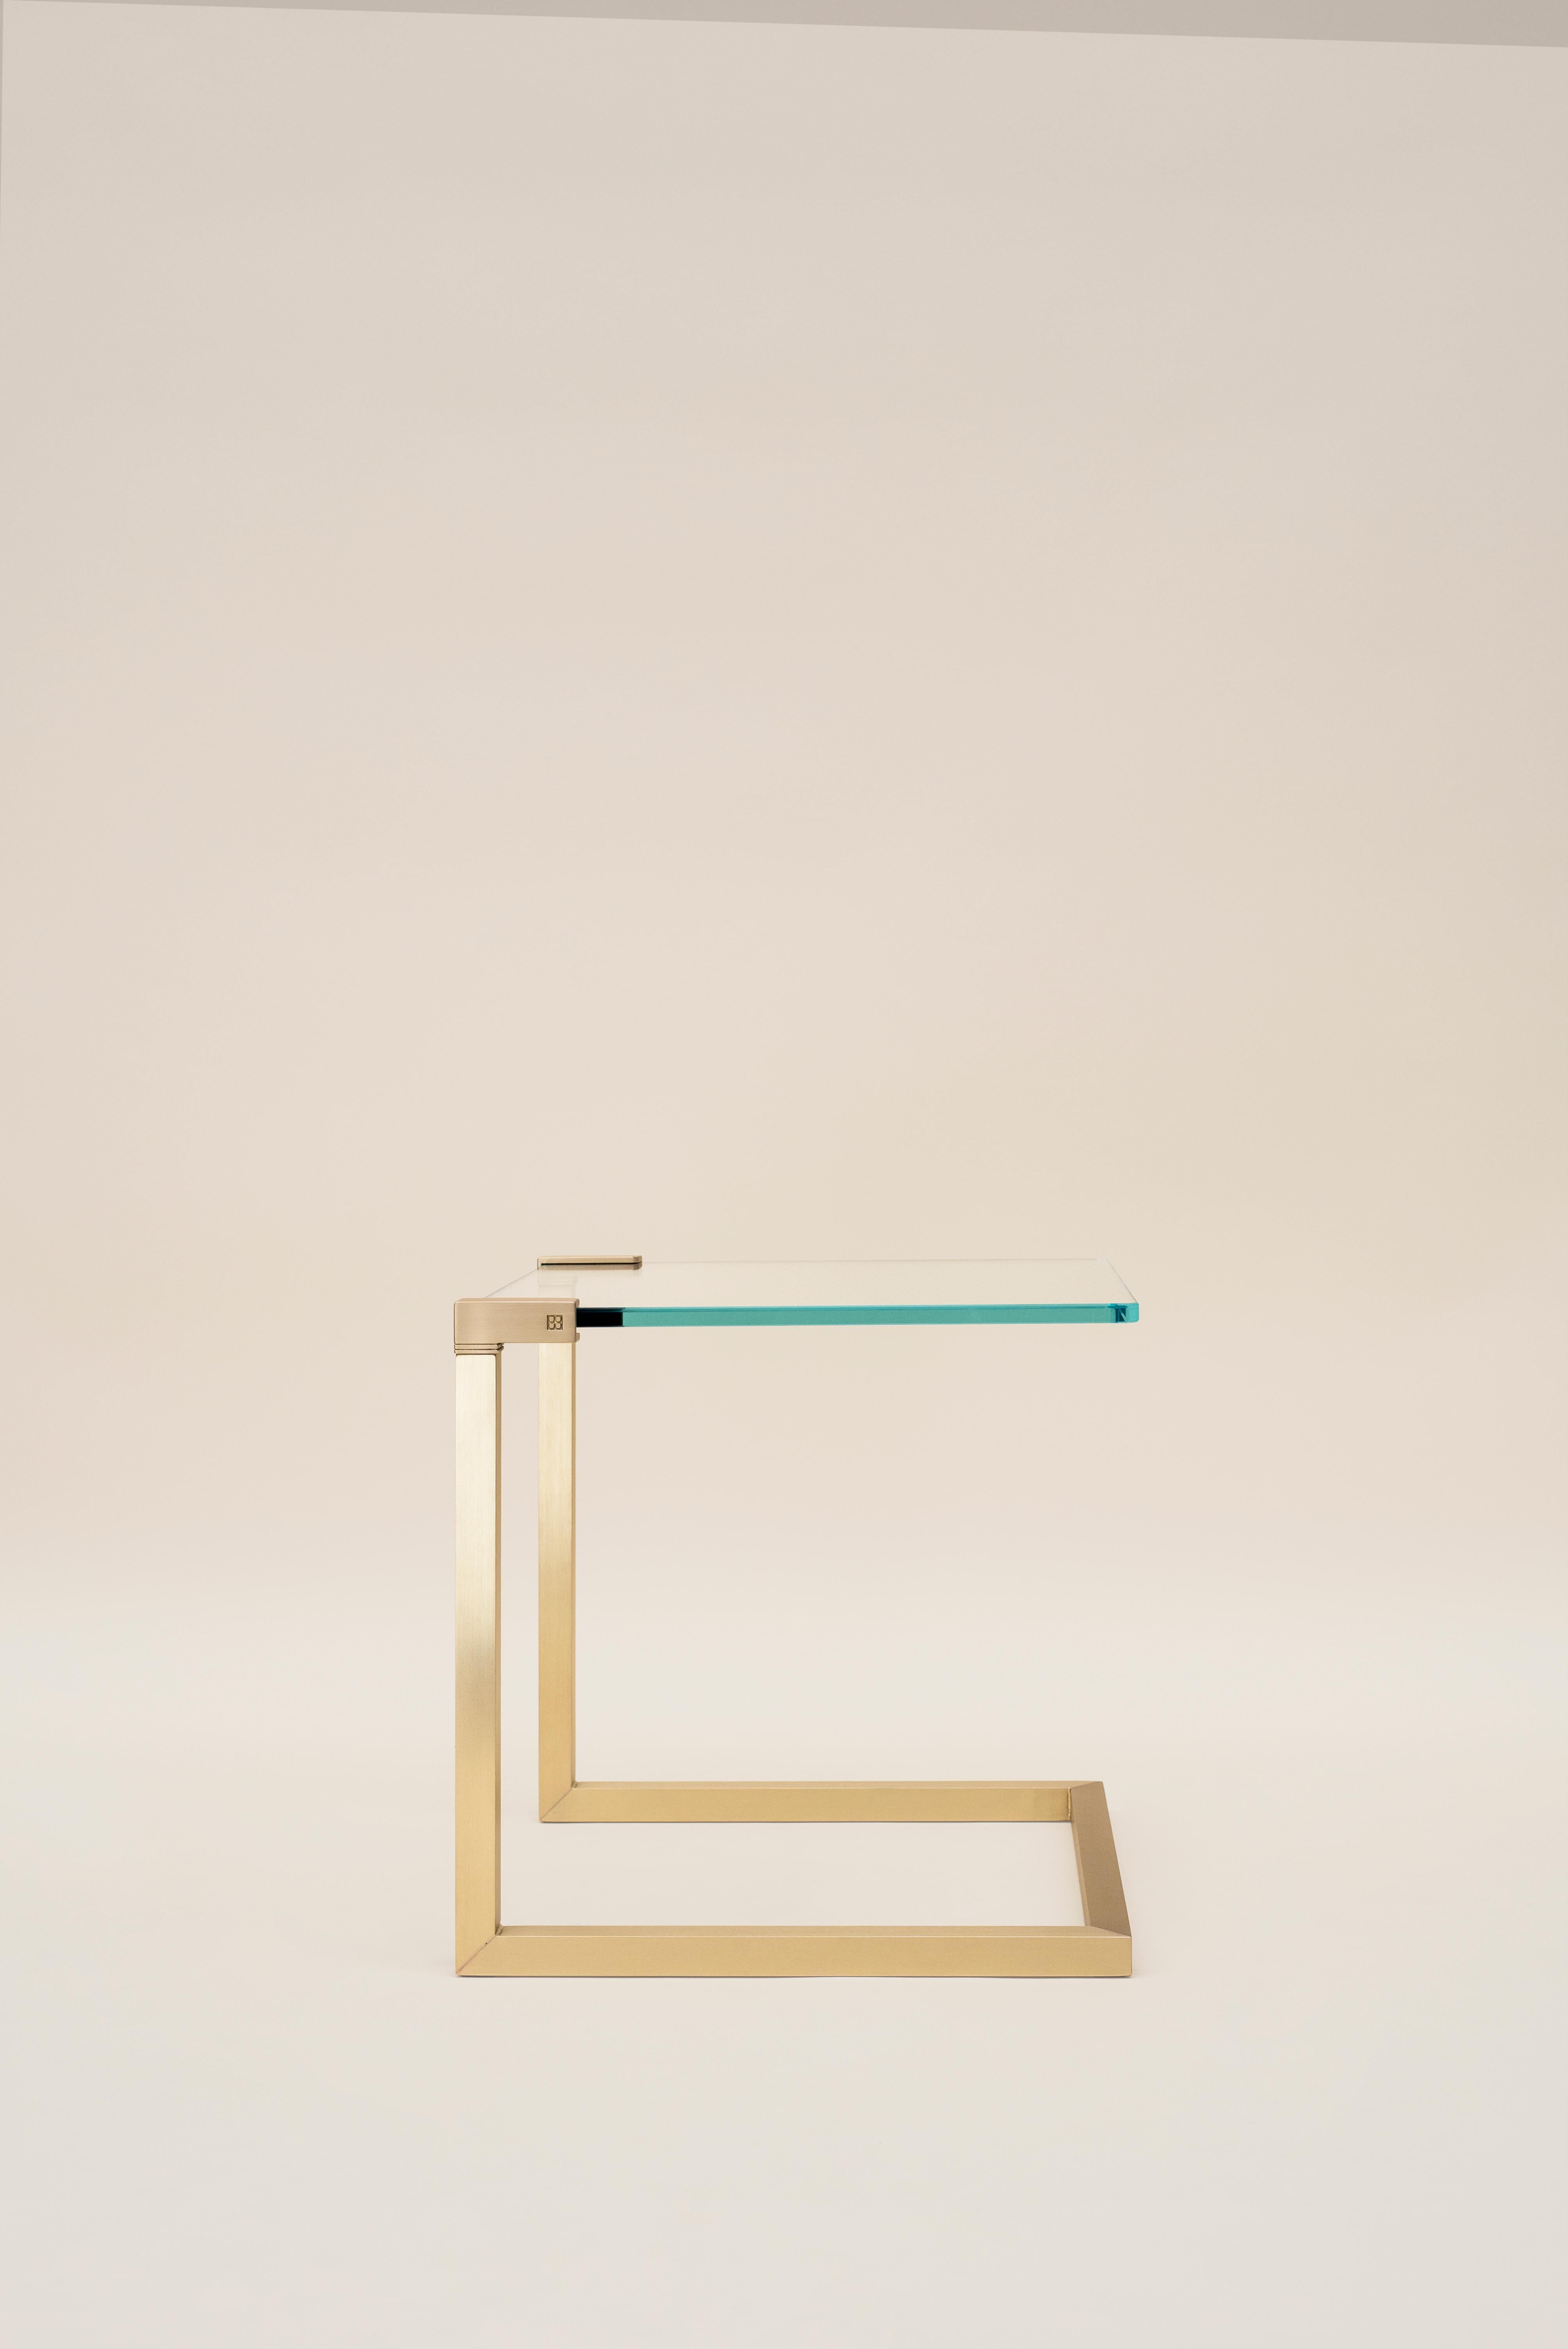 This late 20th century minimalist 'Wil' T53C side table was designed by Peter Ghyczy and hand-crafted in the GHYCZY Atelier in the South of the Netherlands in 1995. The 'Wil' T53C side table features a glass tabletop with a casted polished brass